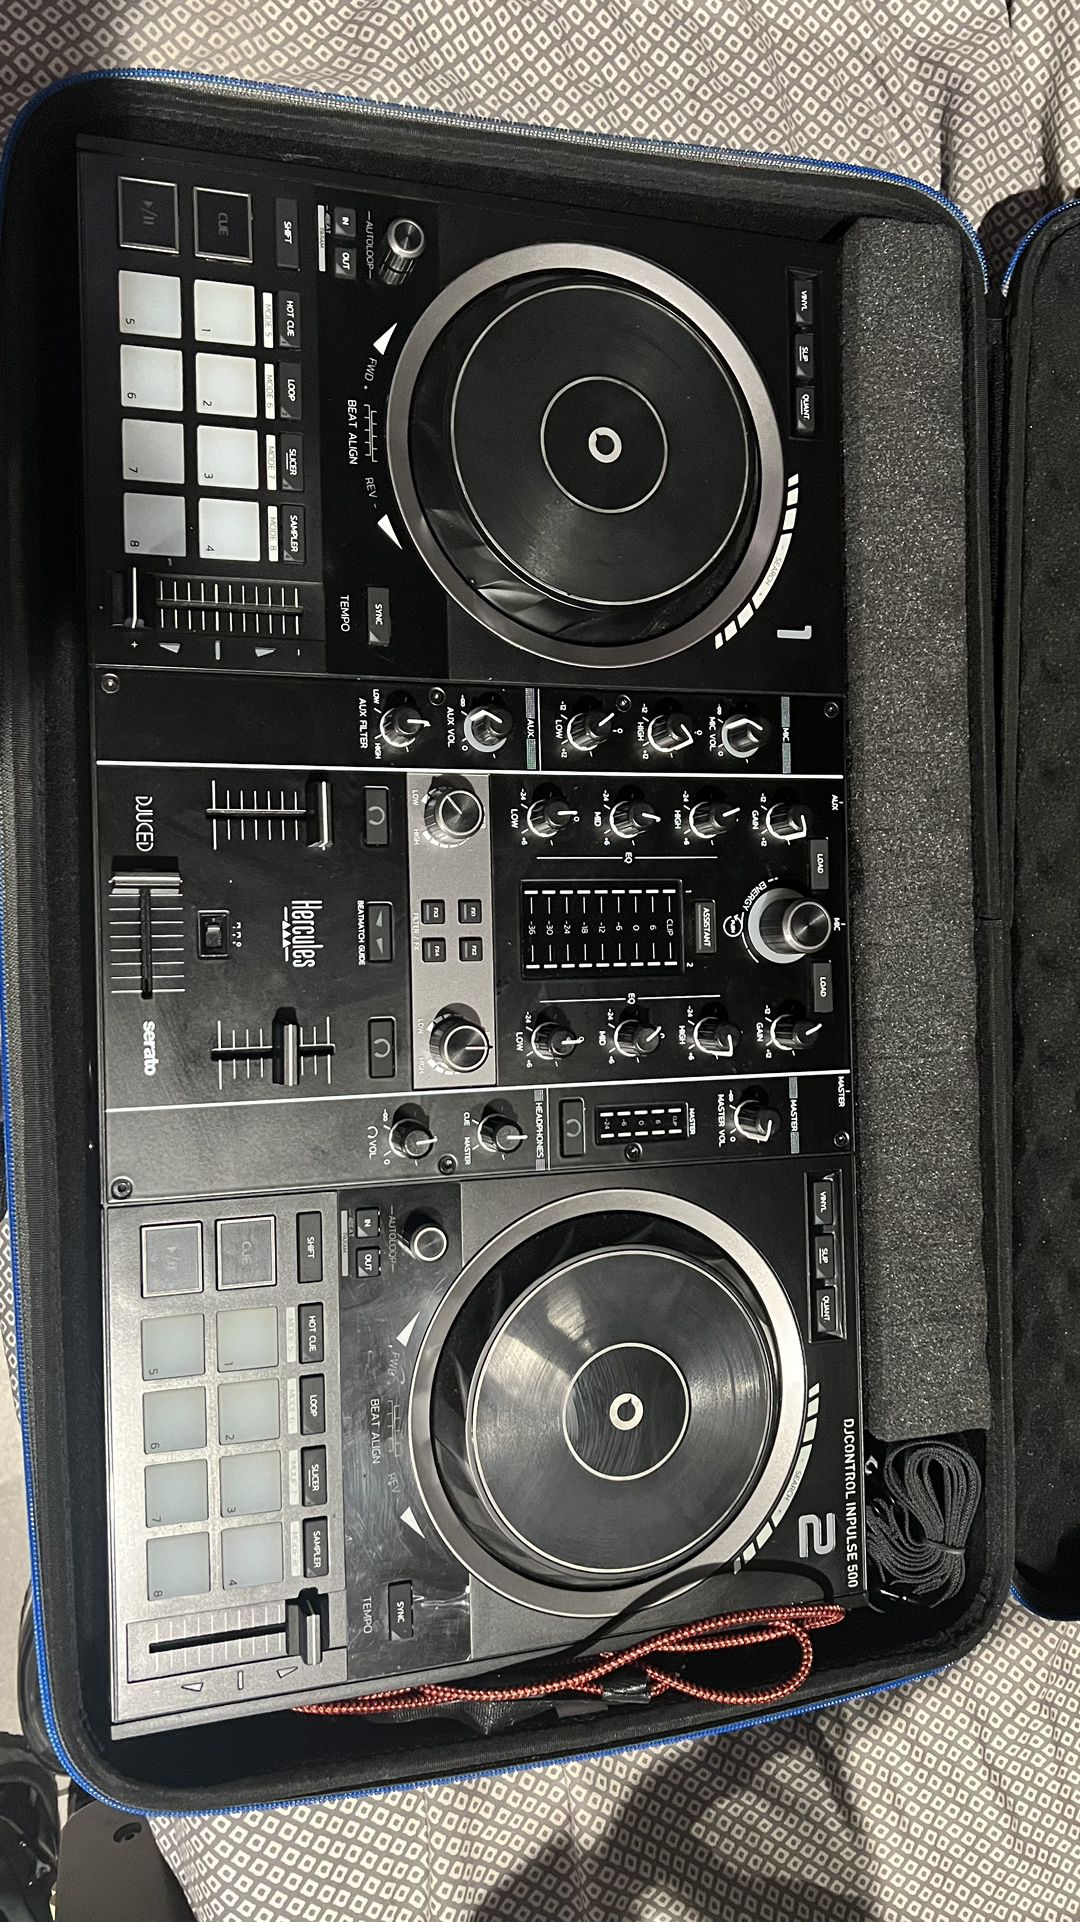 hercules inpulse 500 Dj With Small Speaker And The Case For Mixer